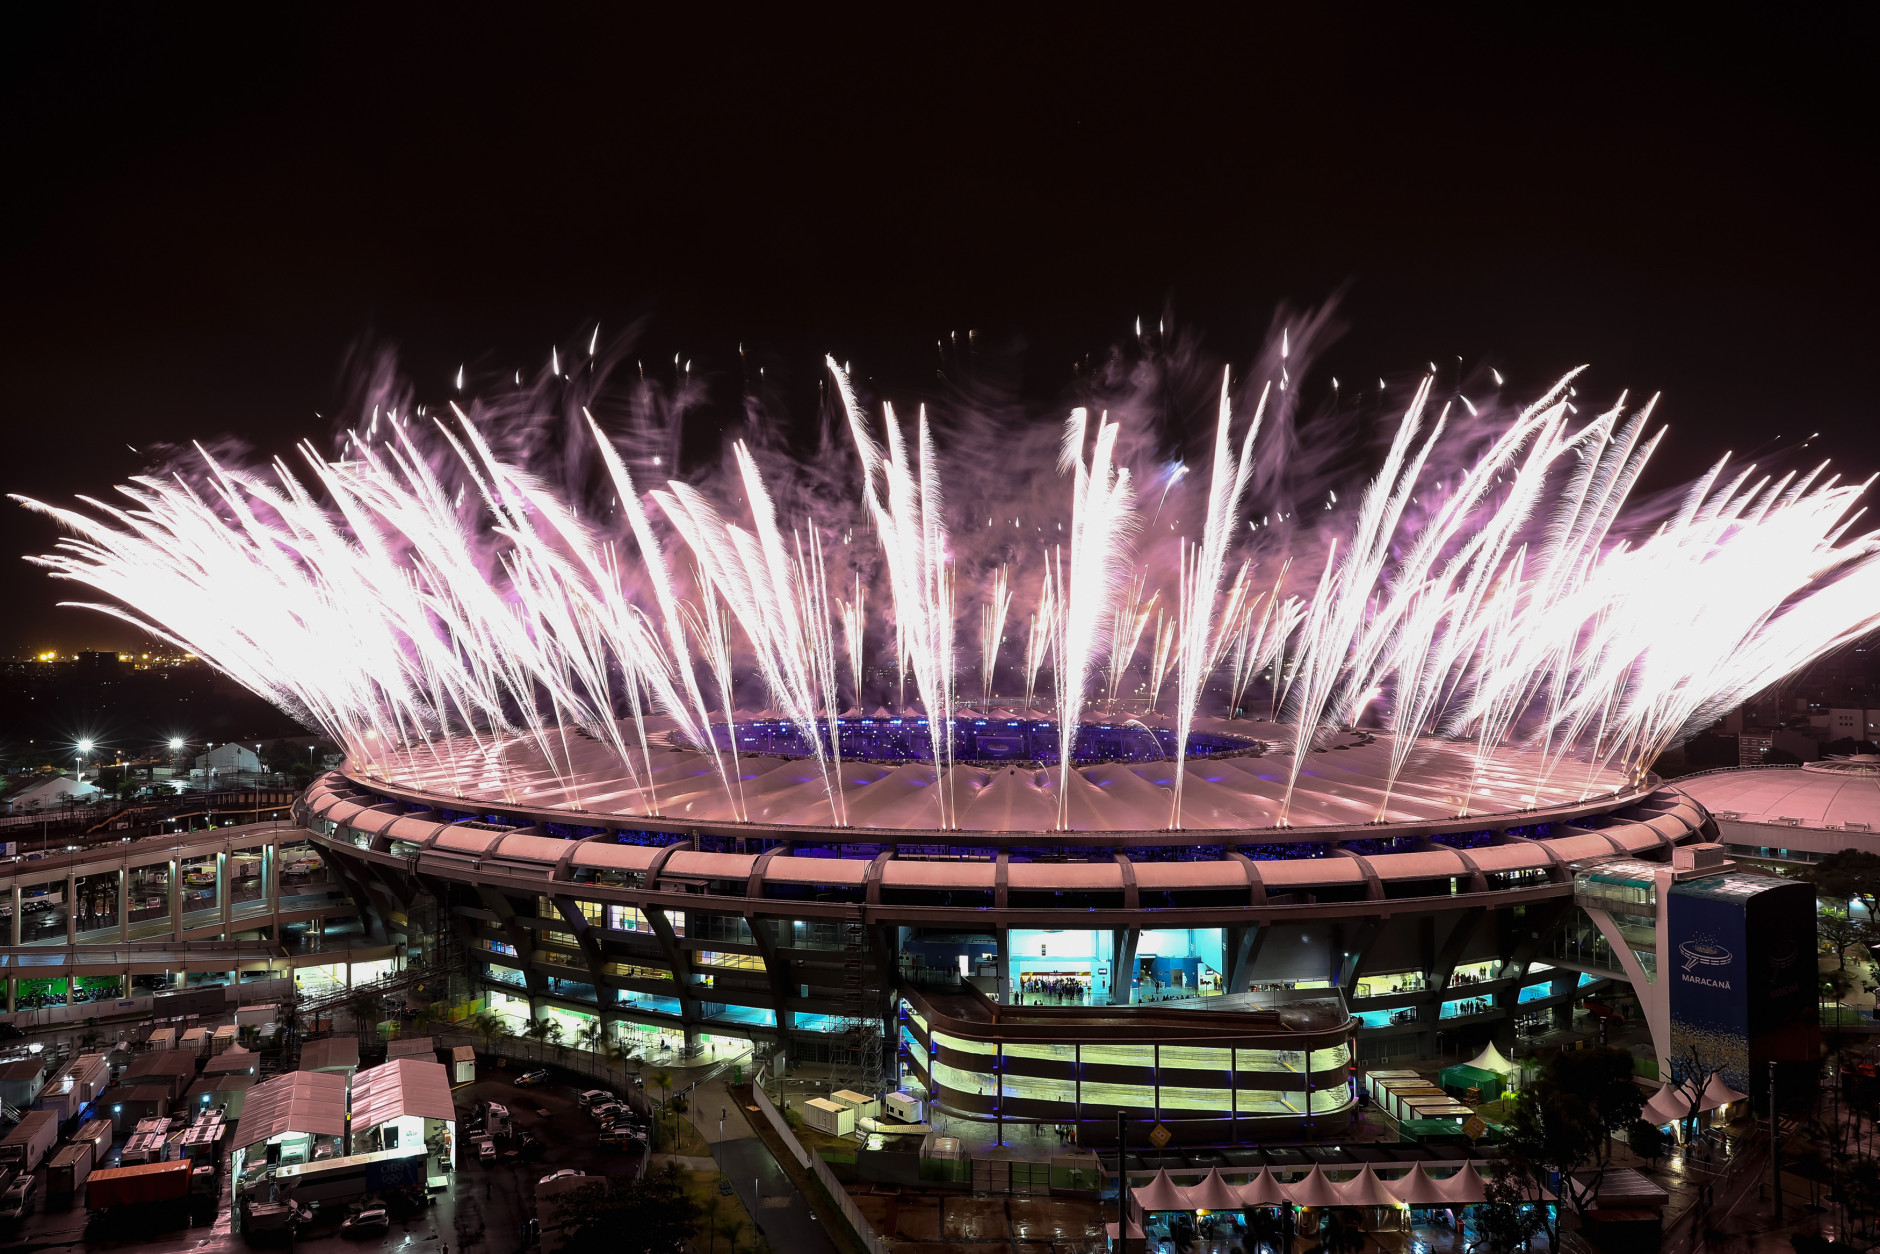 RIO DE JANEIRO, BRAZIL - AUGUST 21:  Fireworks explode during the Closing Ceremony 2016 Olympic Games at Maracana Stadium on August 21, 2016 in Rio de Janeiro, Brazil.  (Photo by Buda Mendes/Getty Images)